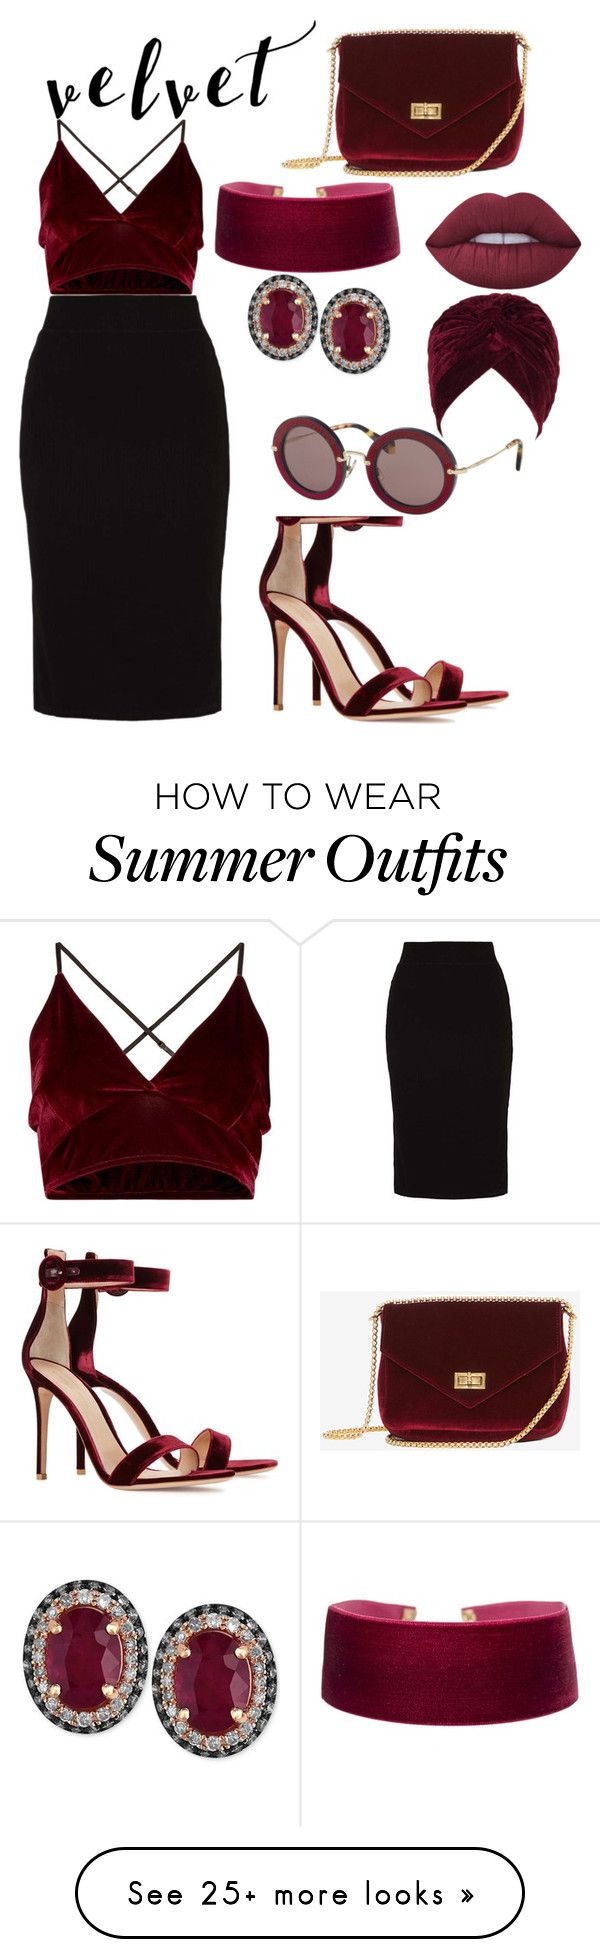 "velvet top outfit" by naudiawilliams8 on Polyvore featuring even&...